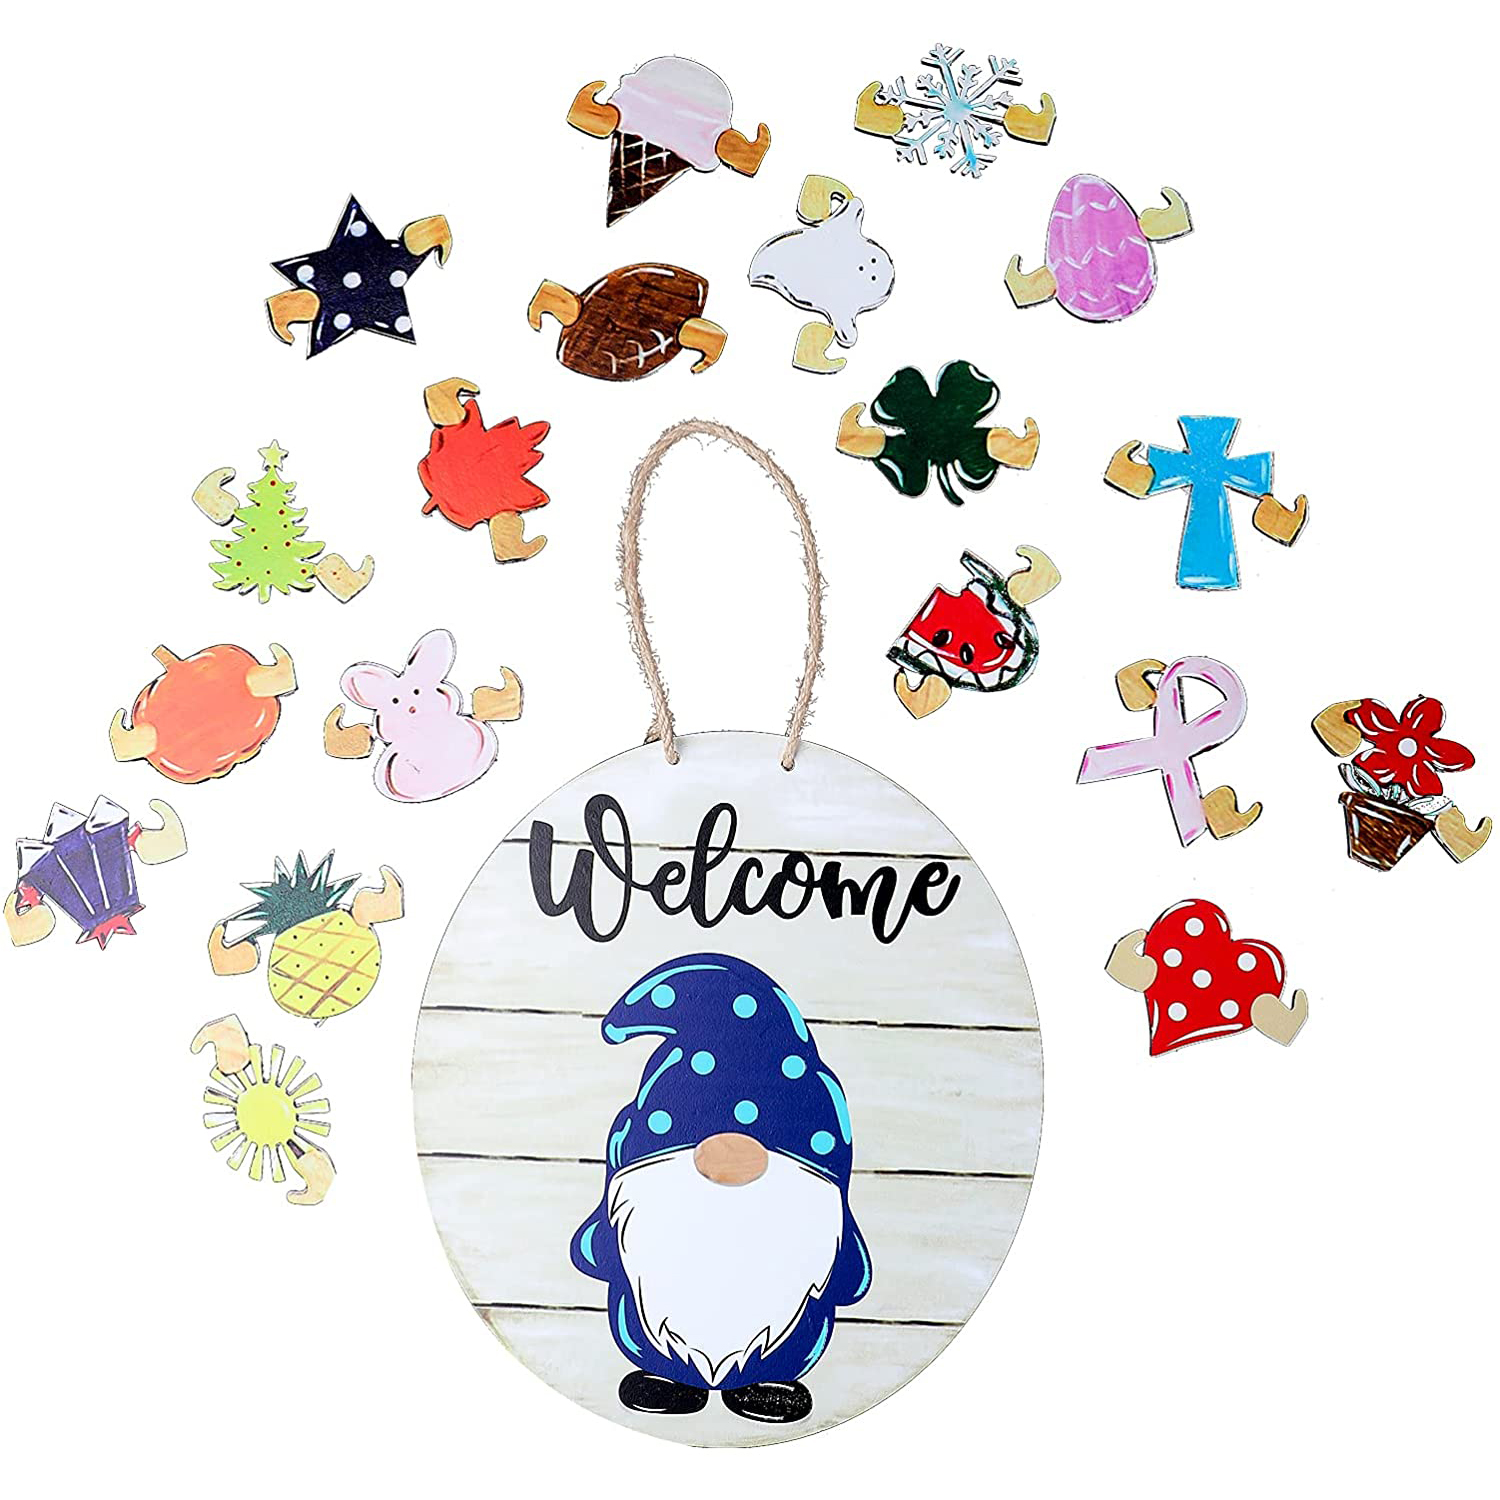 Multi-1 Bestomrogh DIY Door Hanger Round Wooden Gnome Faceless Seasonal Welcome Sign Decor with Interchangeable Holiday Pieces for Front Door Home Decoration Housewarming Gifts